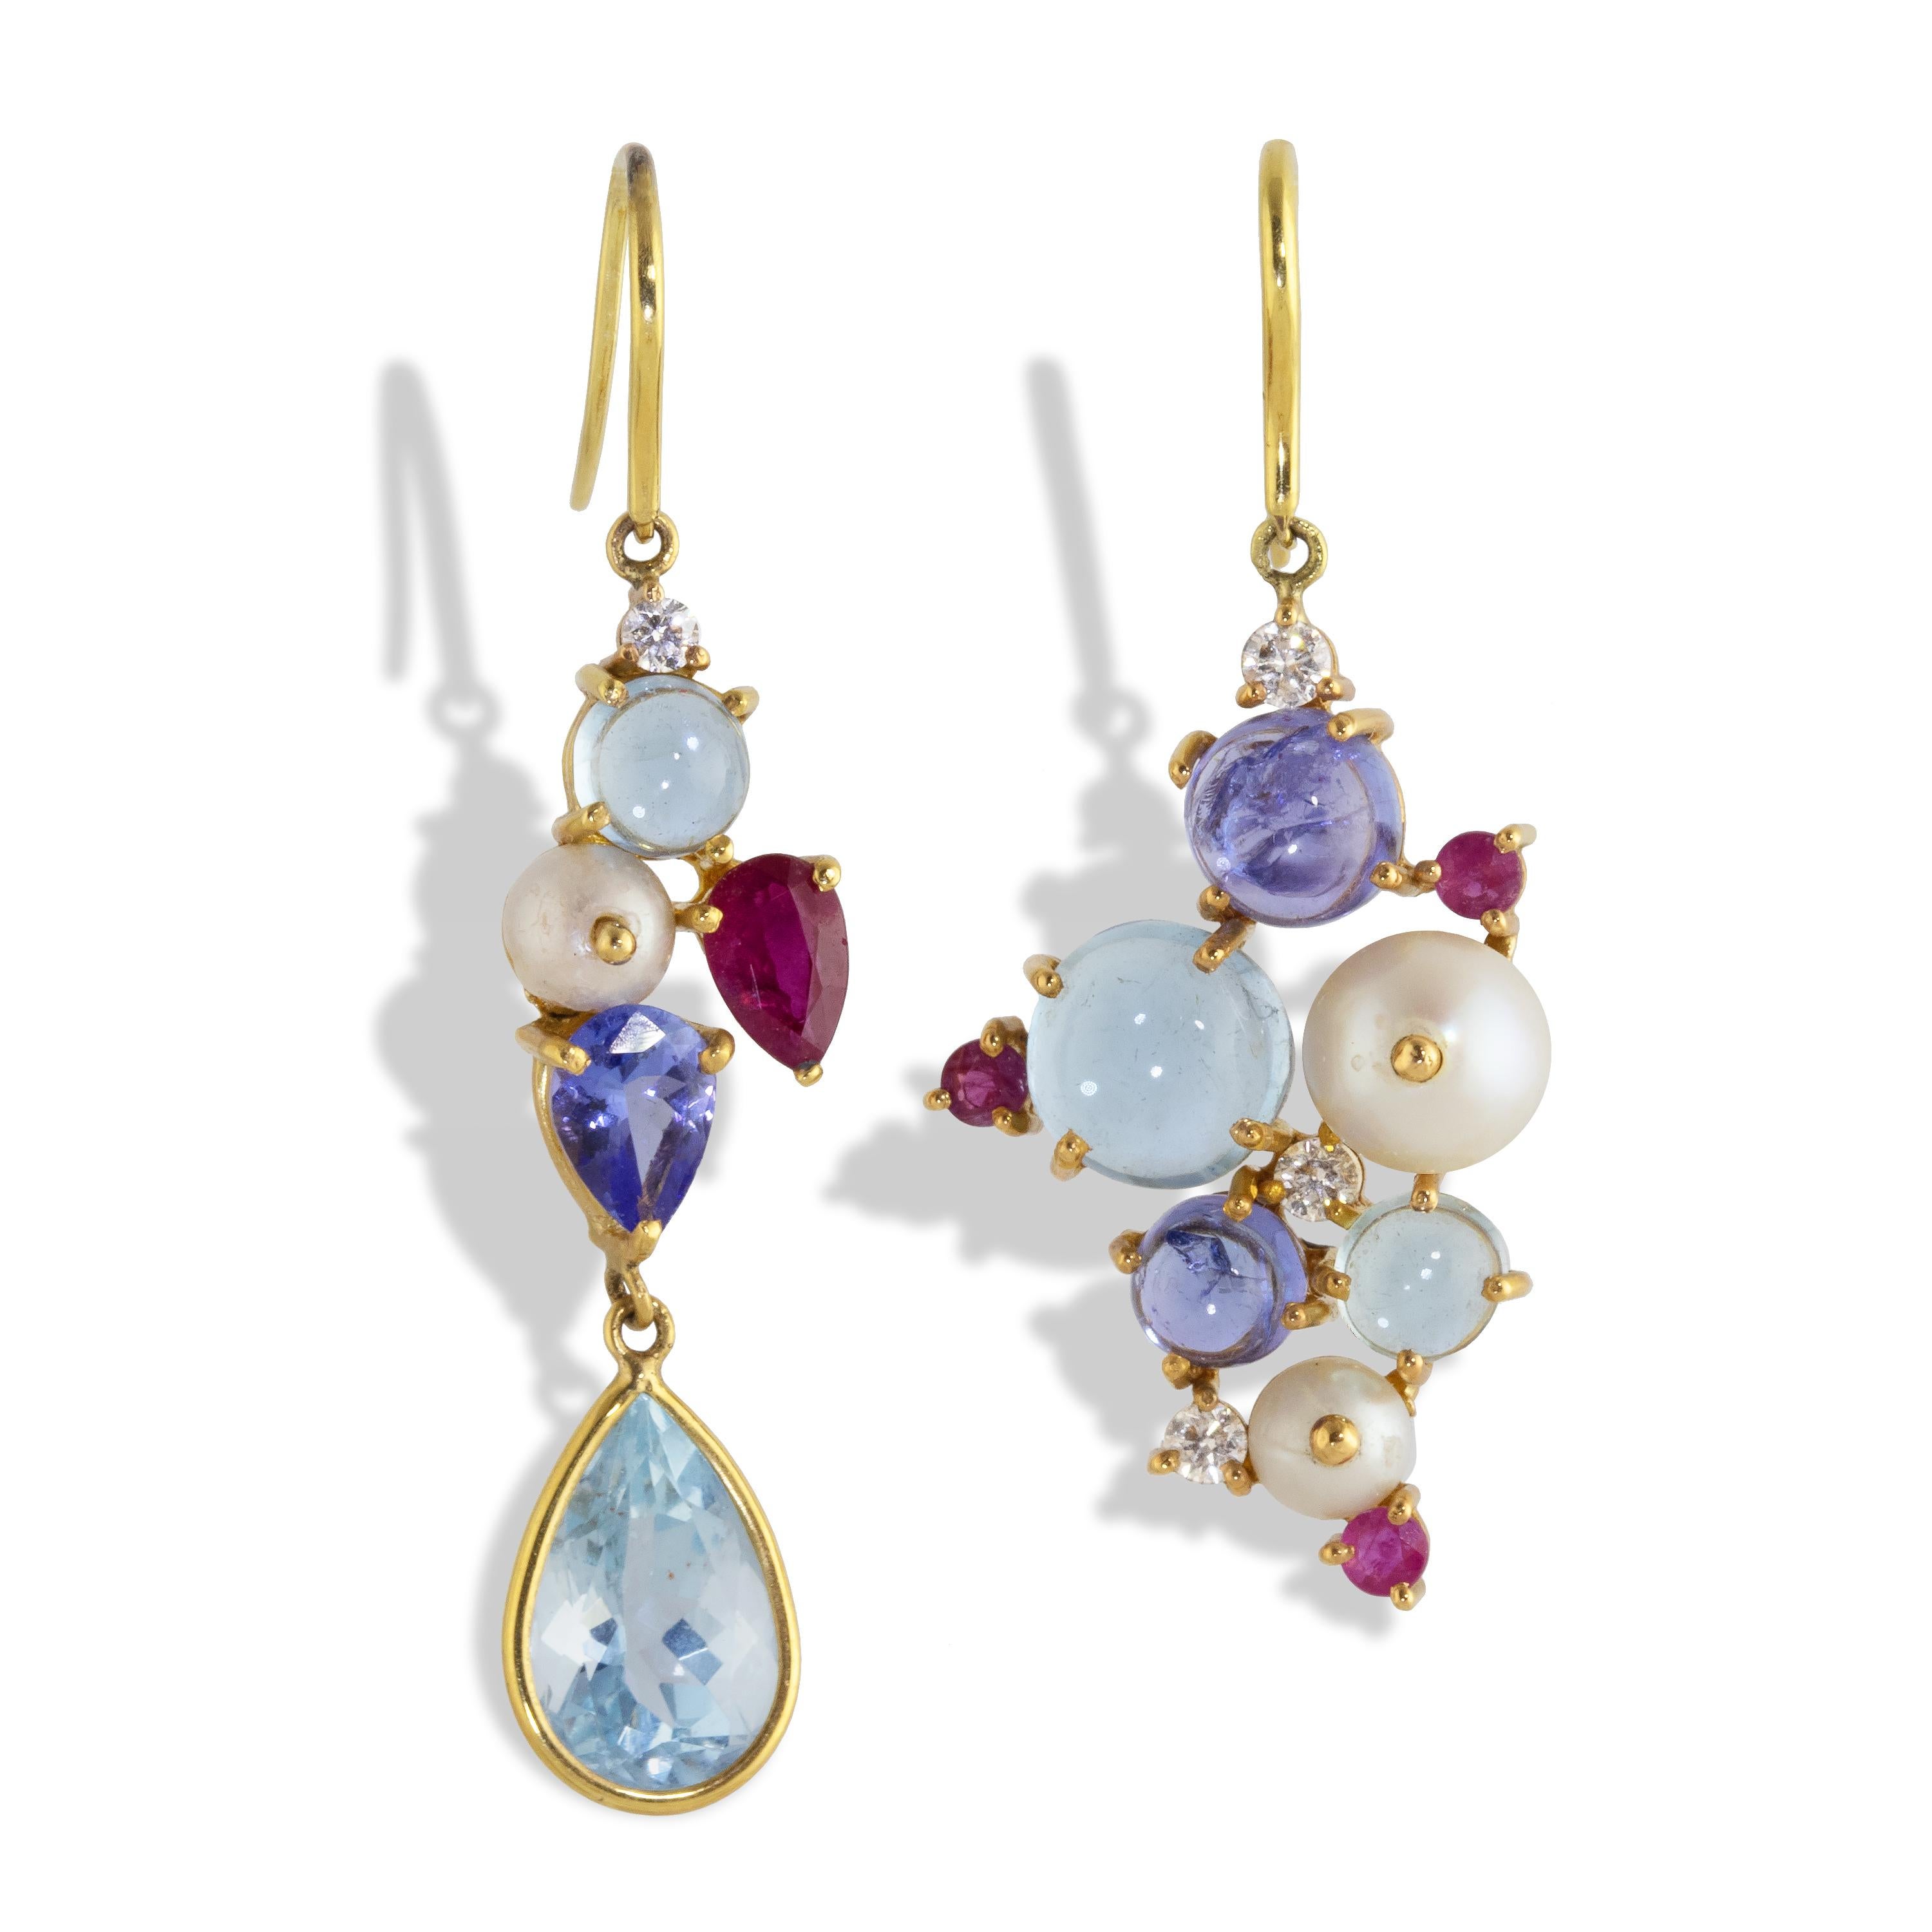 Mismatched pair of cluster earrings featuring Aquamarine, Tanzanite, Diamonds, Rubies and Pearls compliment each other in slightly different shapes.  A 3.84  carat Aquamarine pear drop hangs from a cluster which includes a pear shaped tanzanite,